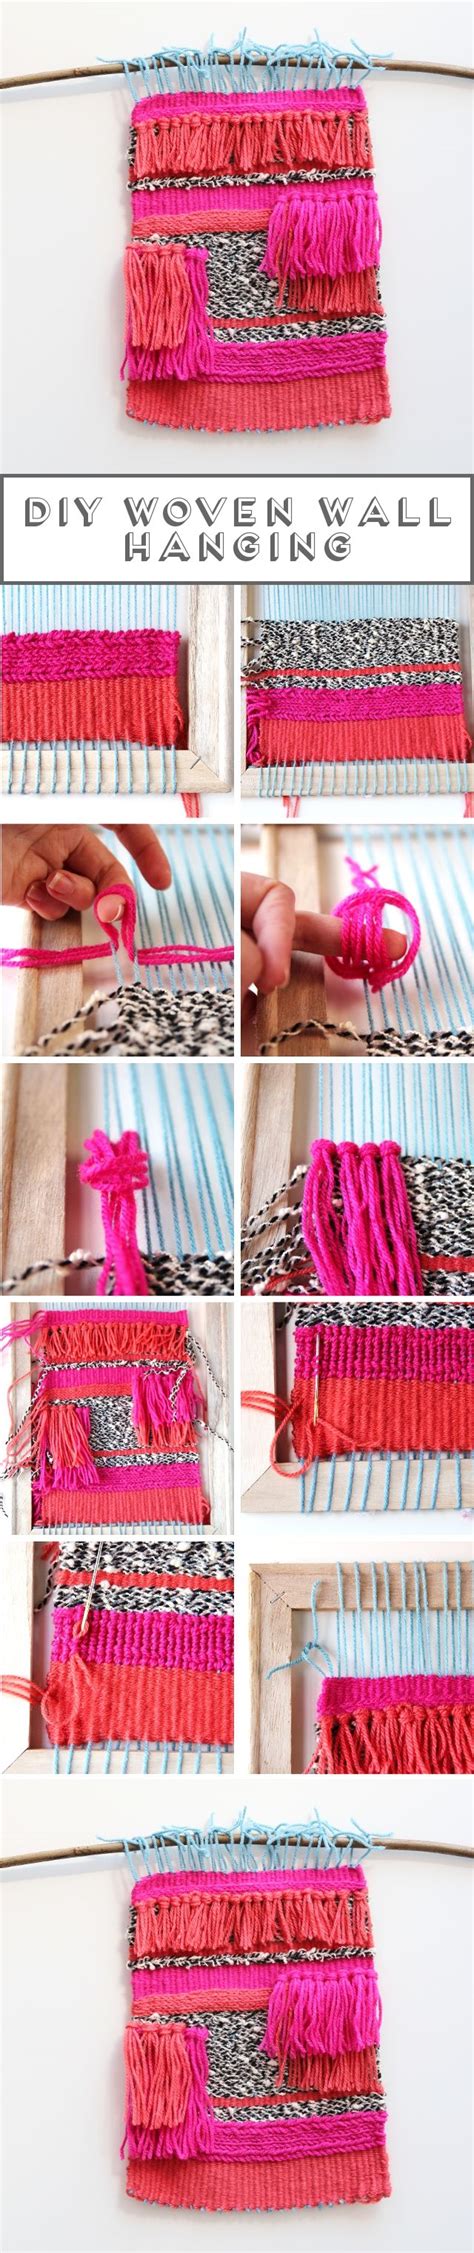 Diy Weaving Weaving Projects Craft Projects Party Projects Yarn